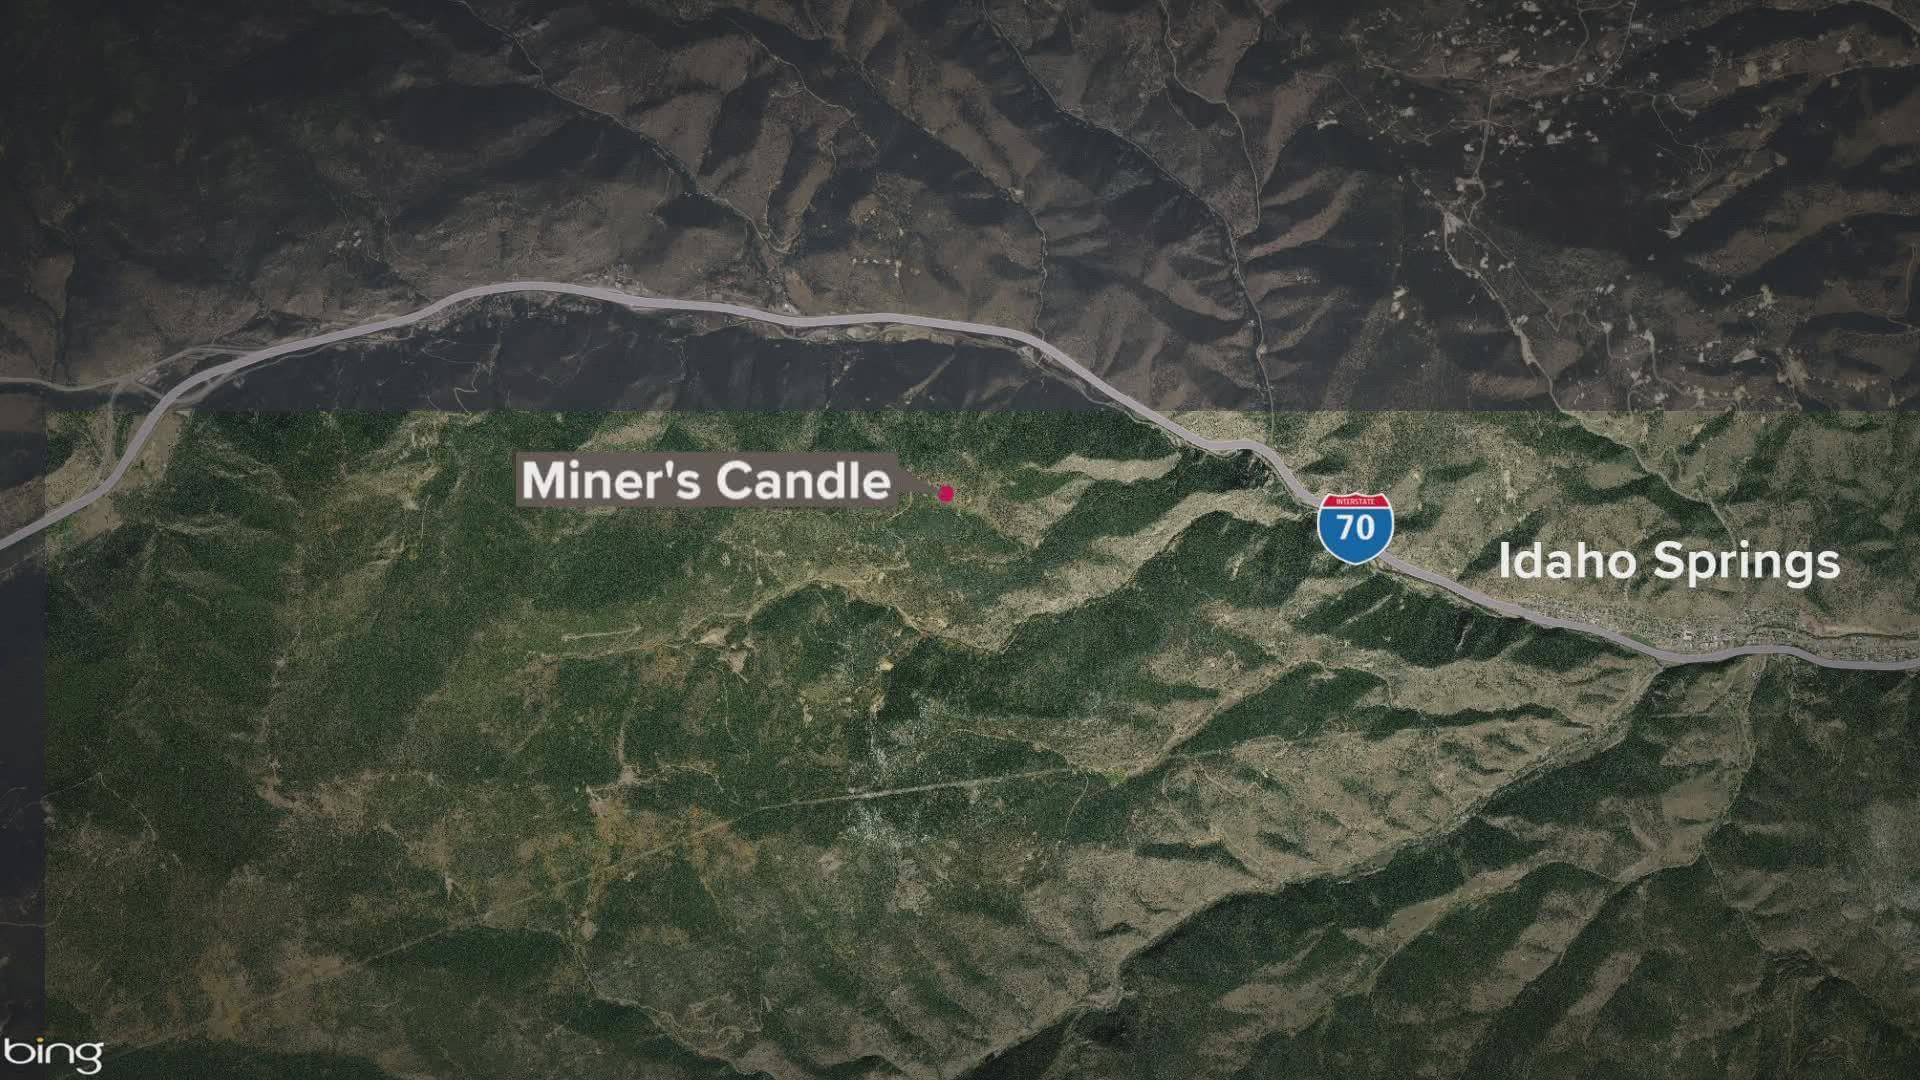 The sheriff's office said the human remains were found in the Miner's Candle area.